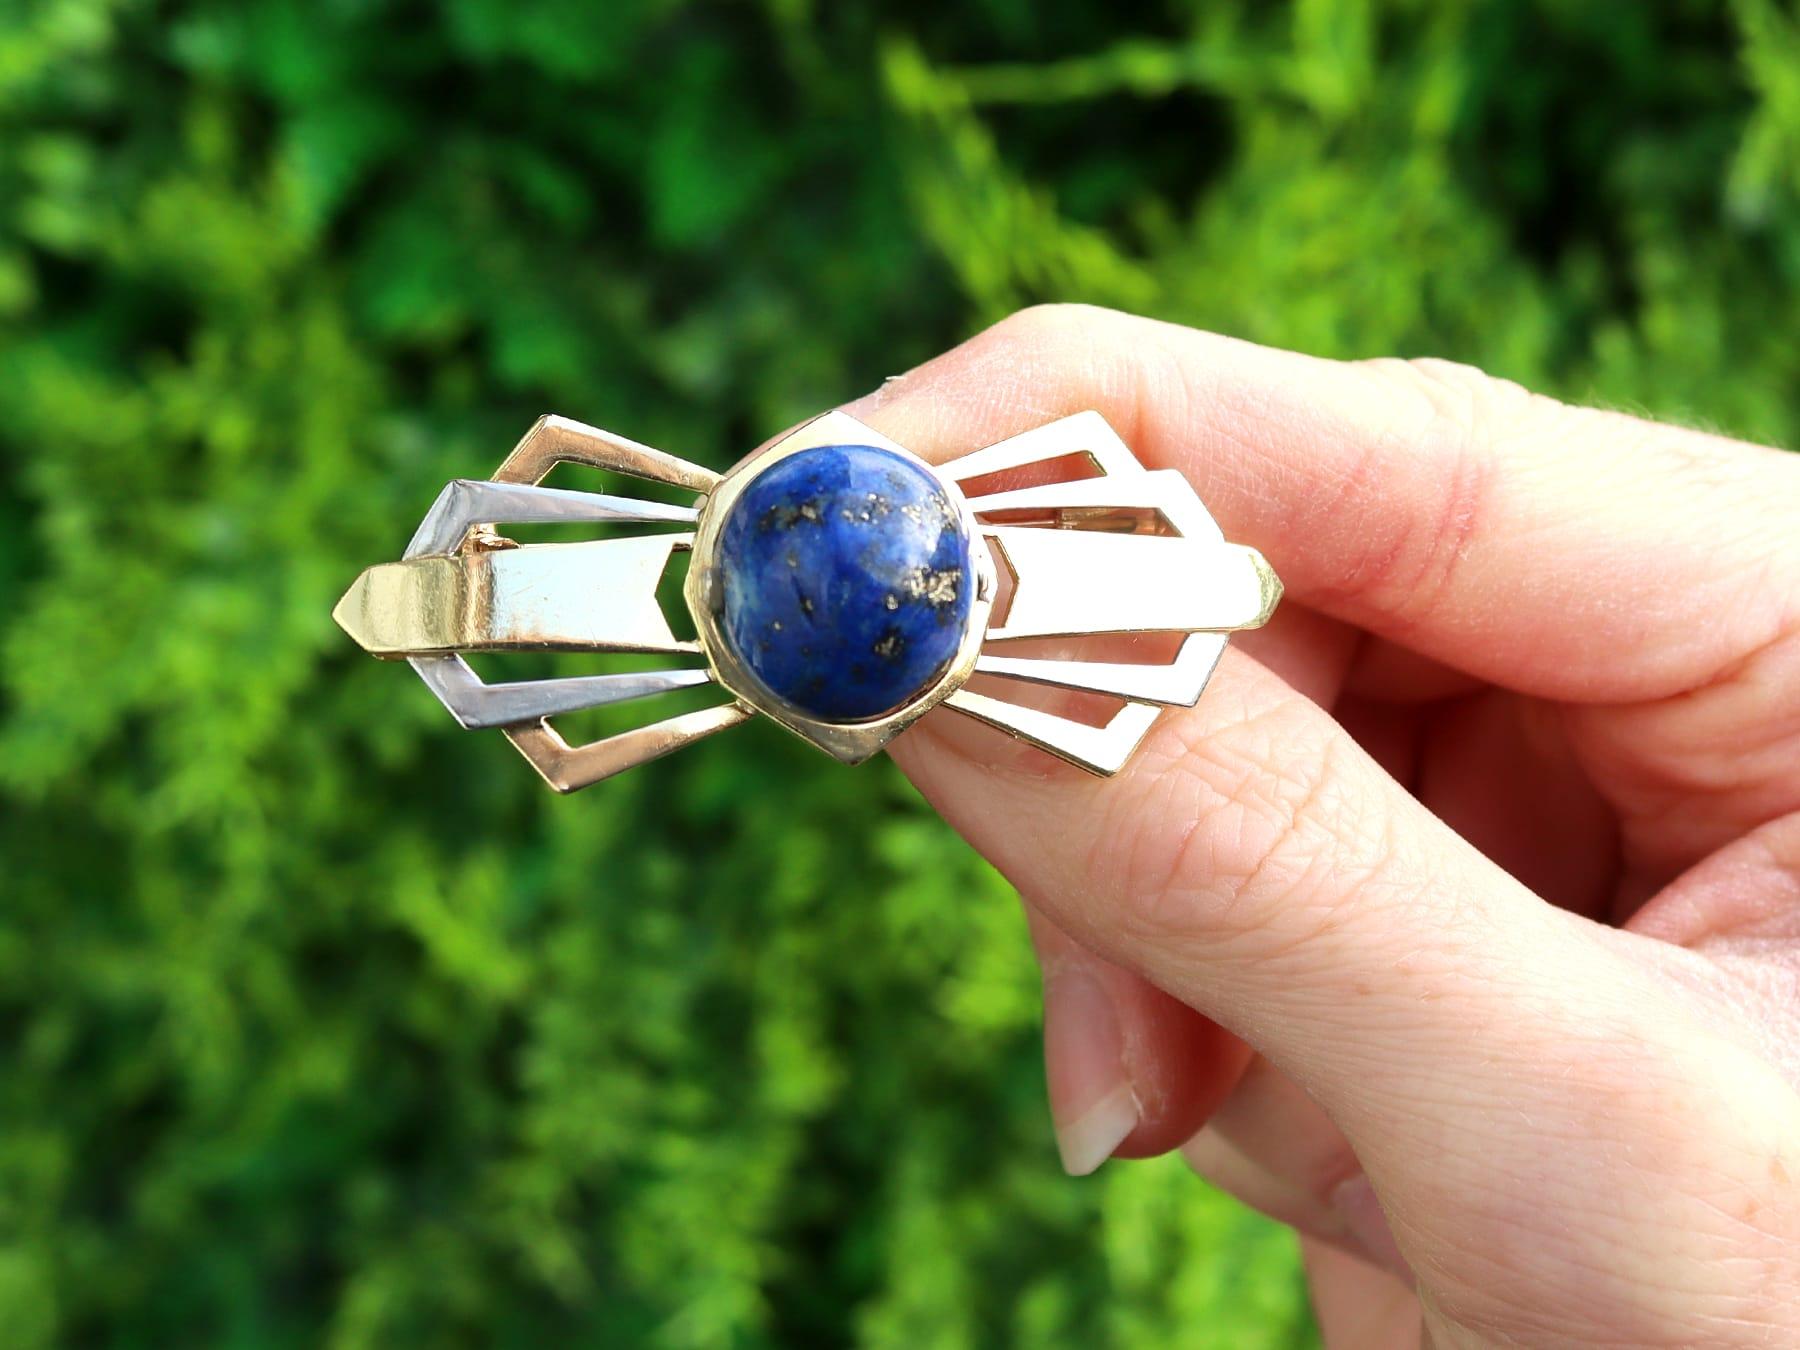 An impressive antique 1930s Art Deco 14.95 carat lapis lazuli, 18 karat yellow and white gold bow brooch; part of our diverse antique jewelry and estate jewelry collections.

This fine and impressive antique brooch has been crafted in 18k yellow and